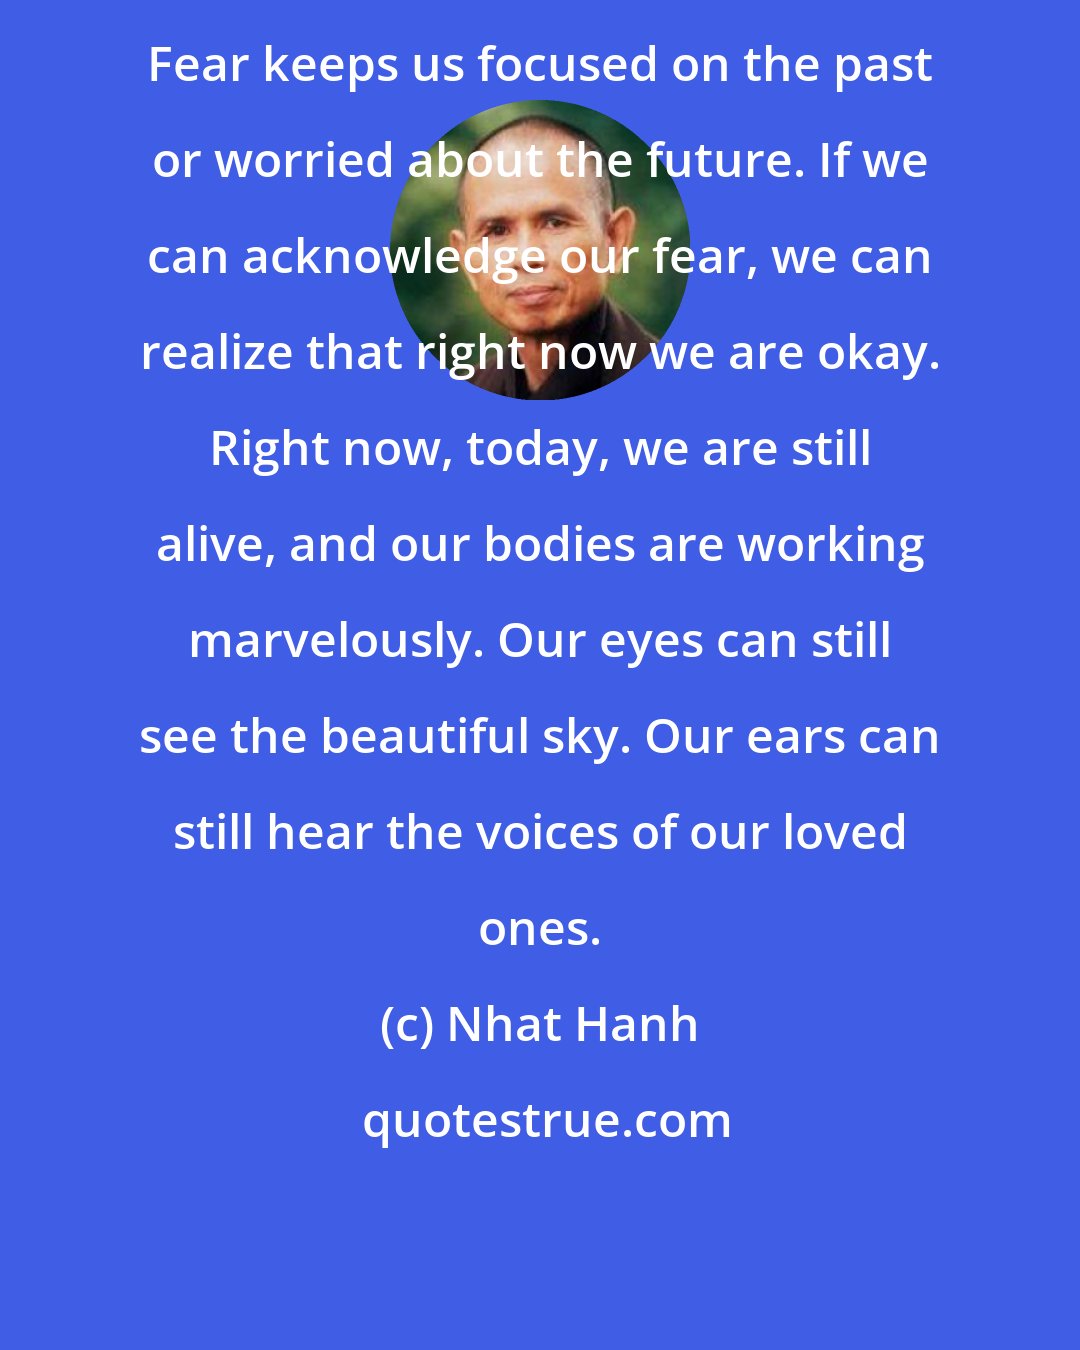 Nhat Hanh: Fear keeps us focused on the past or worried about the future. If we can acknowledge our fear, we can realize that right now we are okay. Right now, today, we are still alive, and our bodies are working marvelously. Our eyes can still see the beautiful sky. Our ears can still hear the voices of our loved ones.